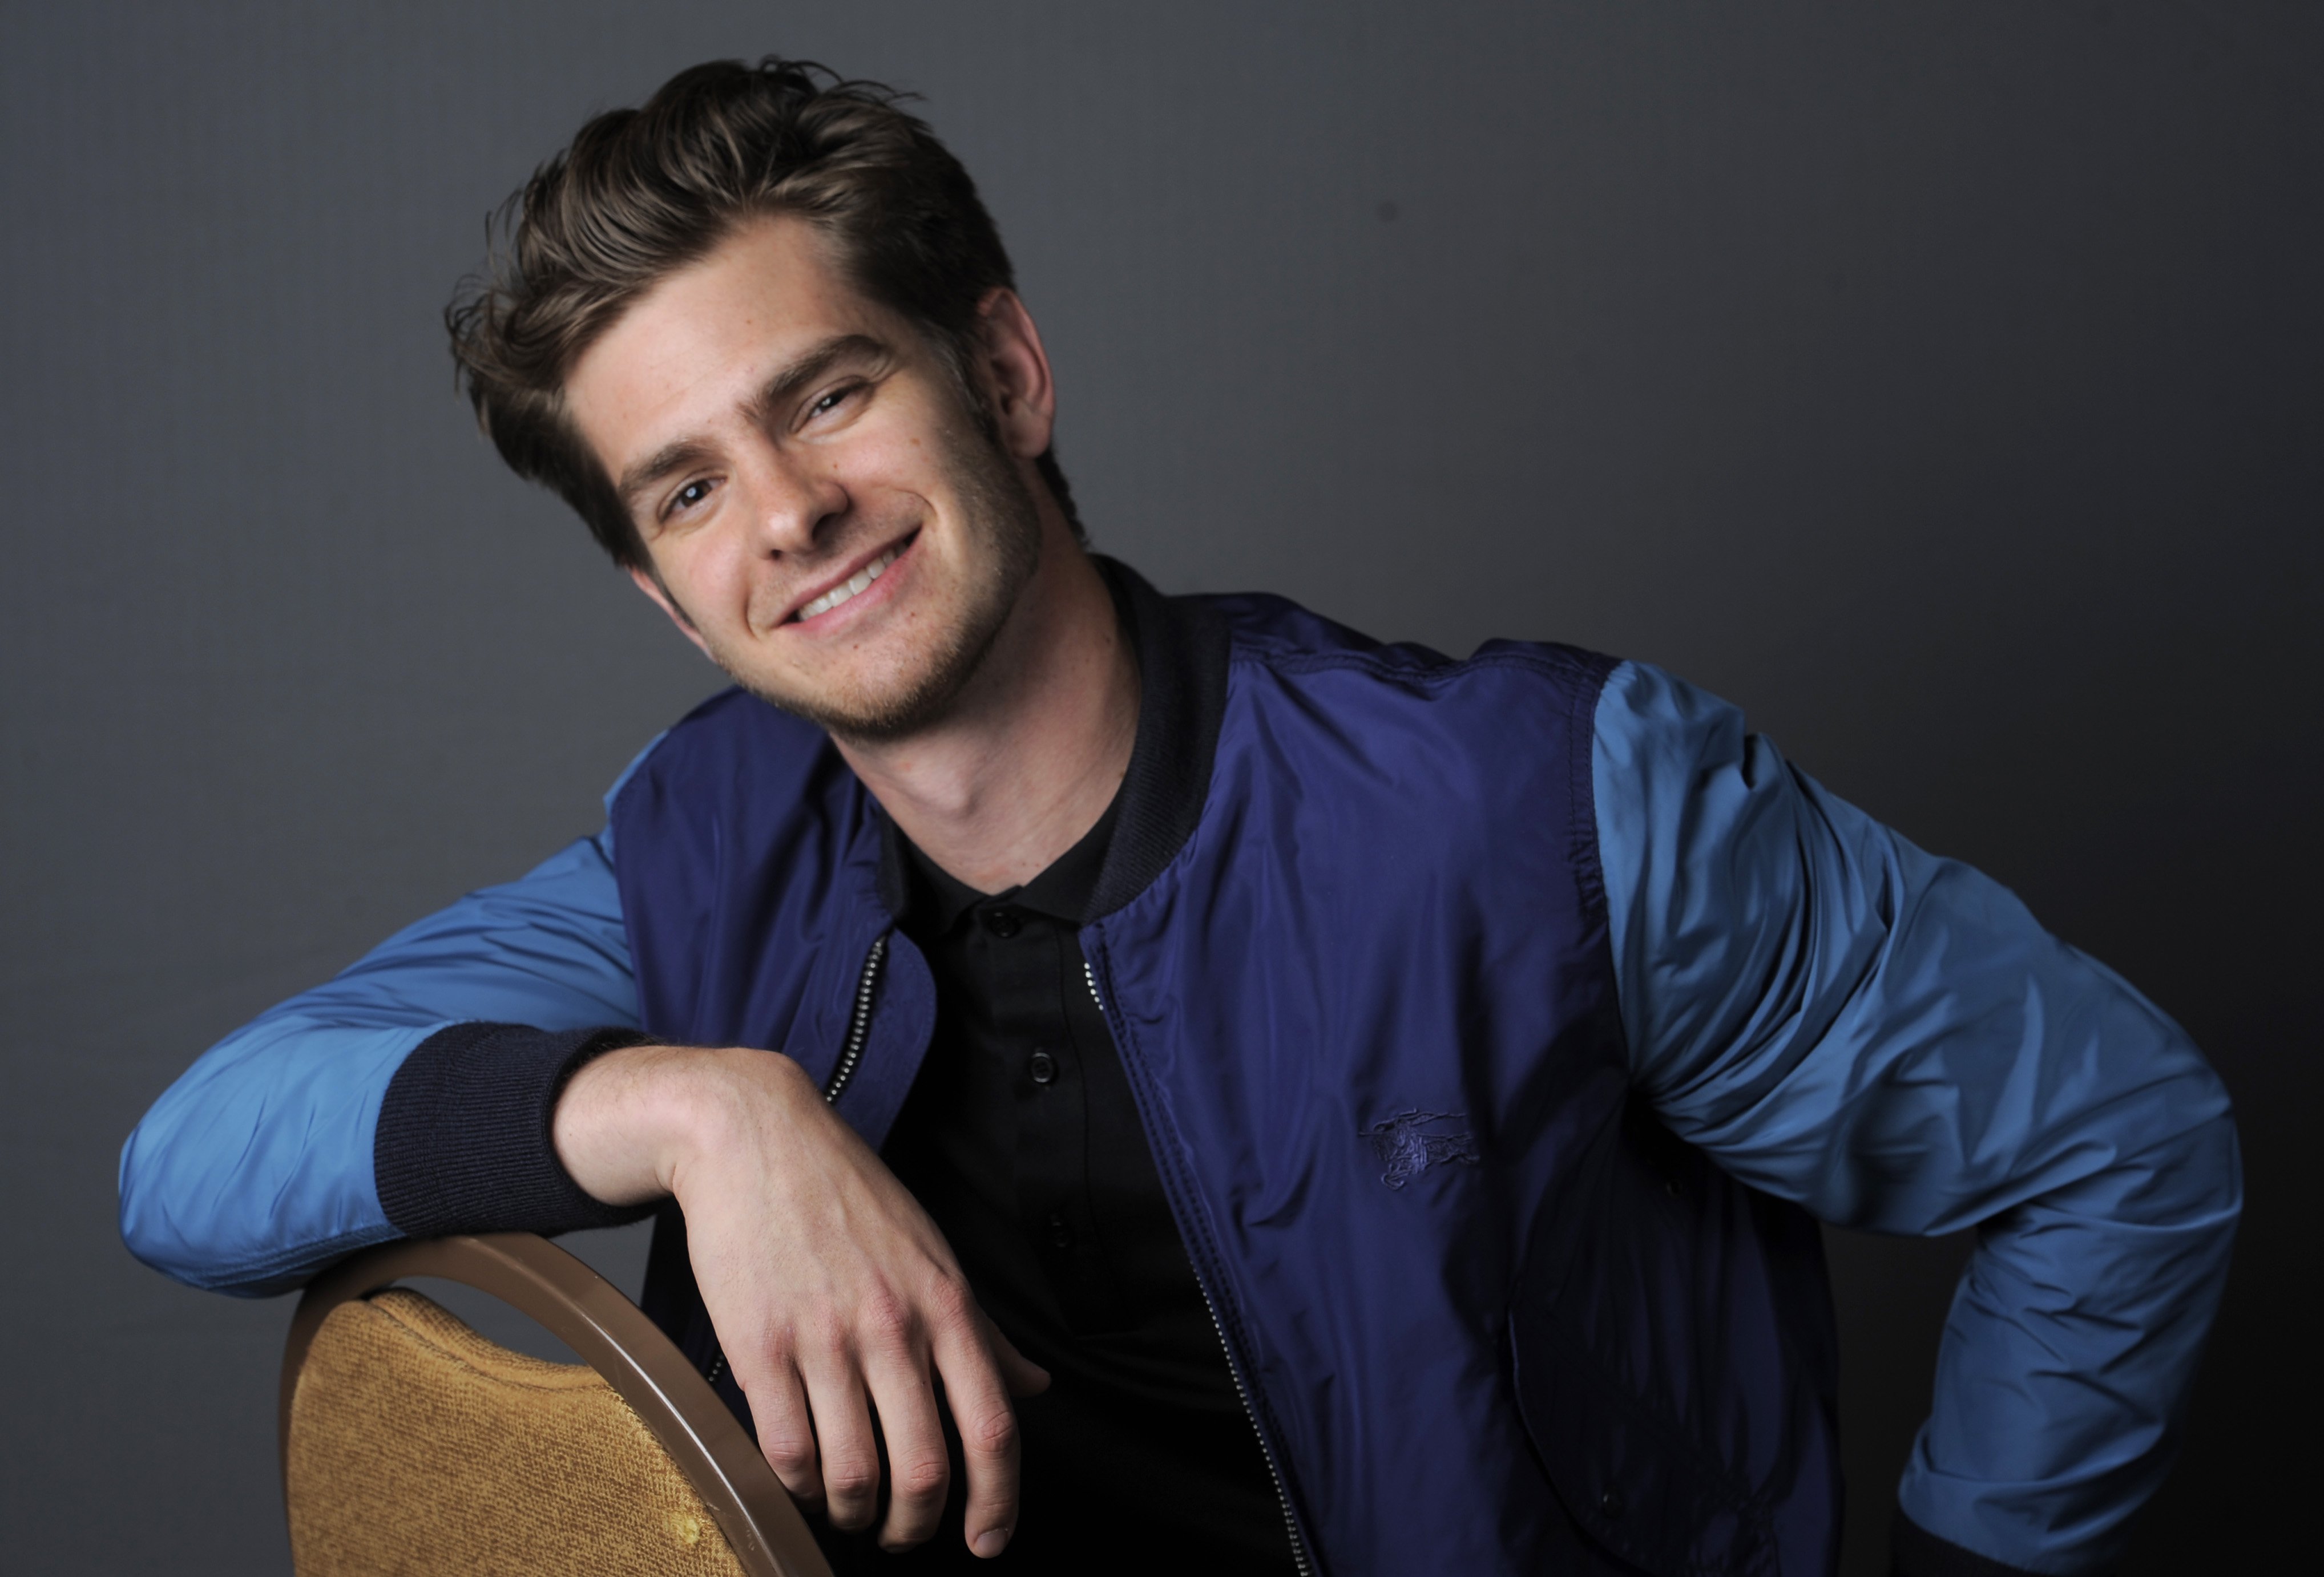  Andrew Garfield  Height, Weight and Body Measurements